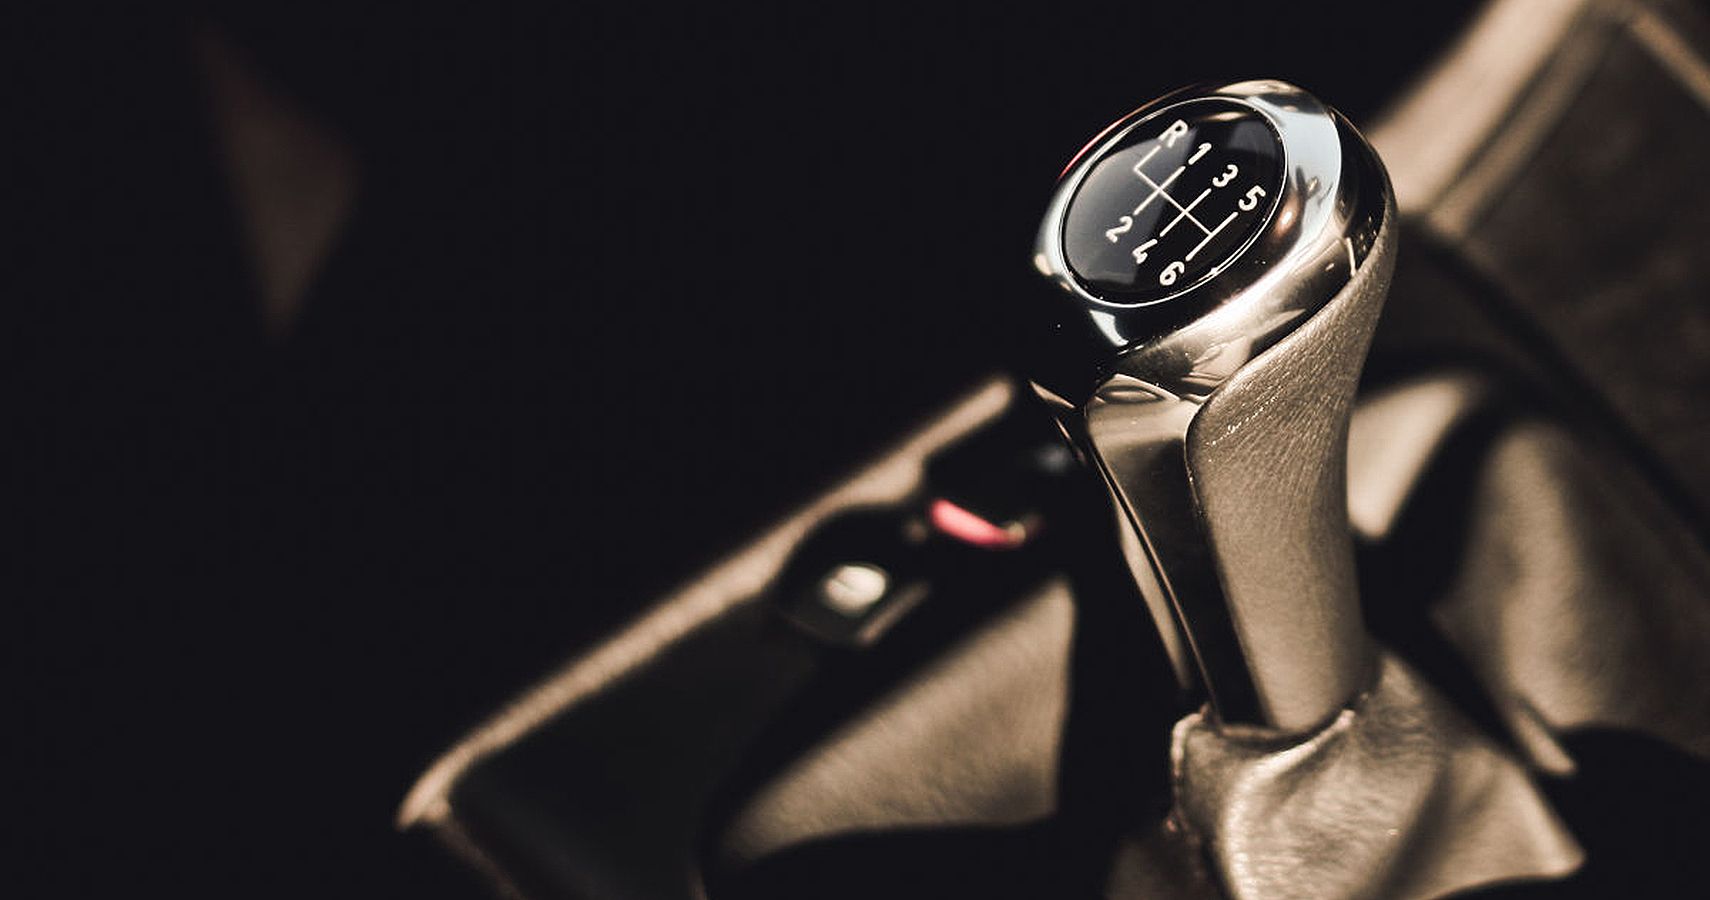 Manual Transmission Is An Informed Choice